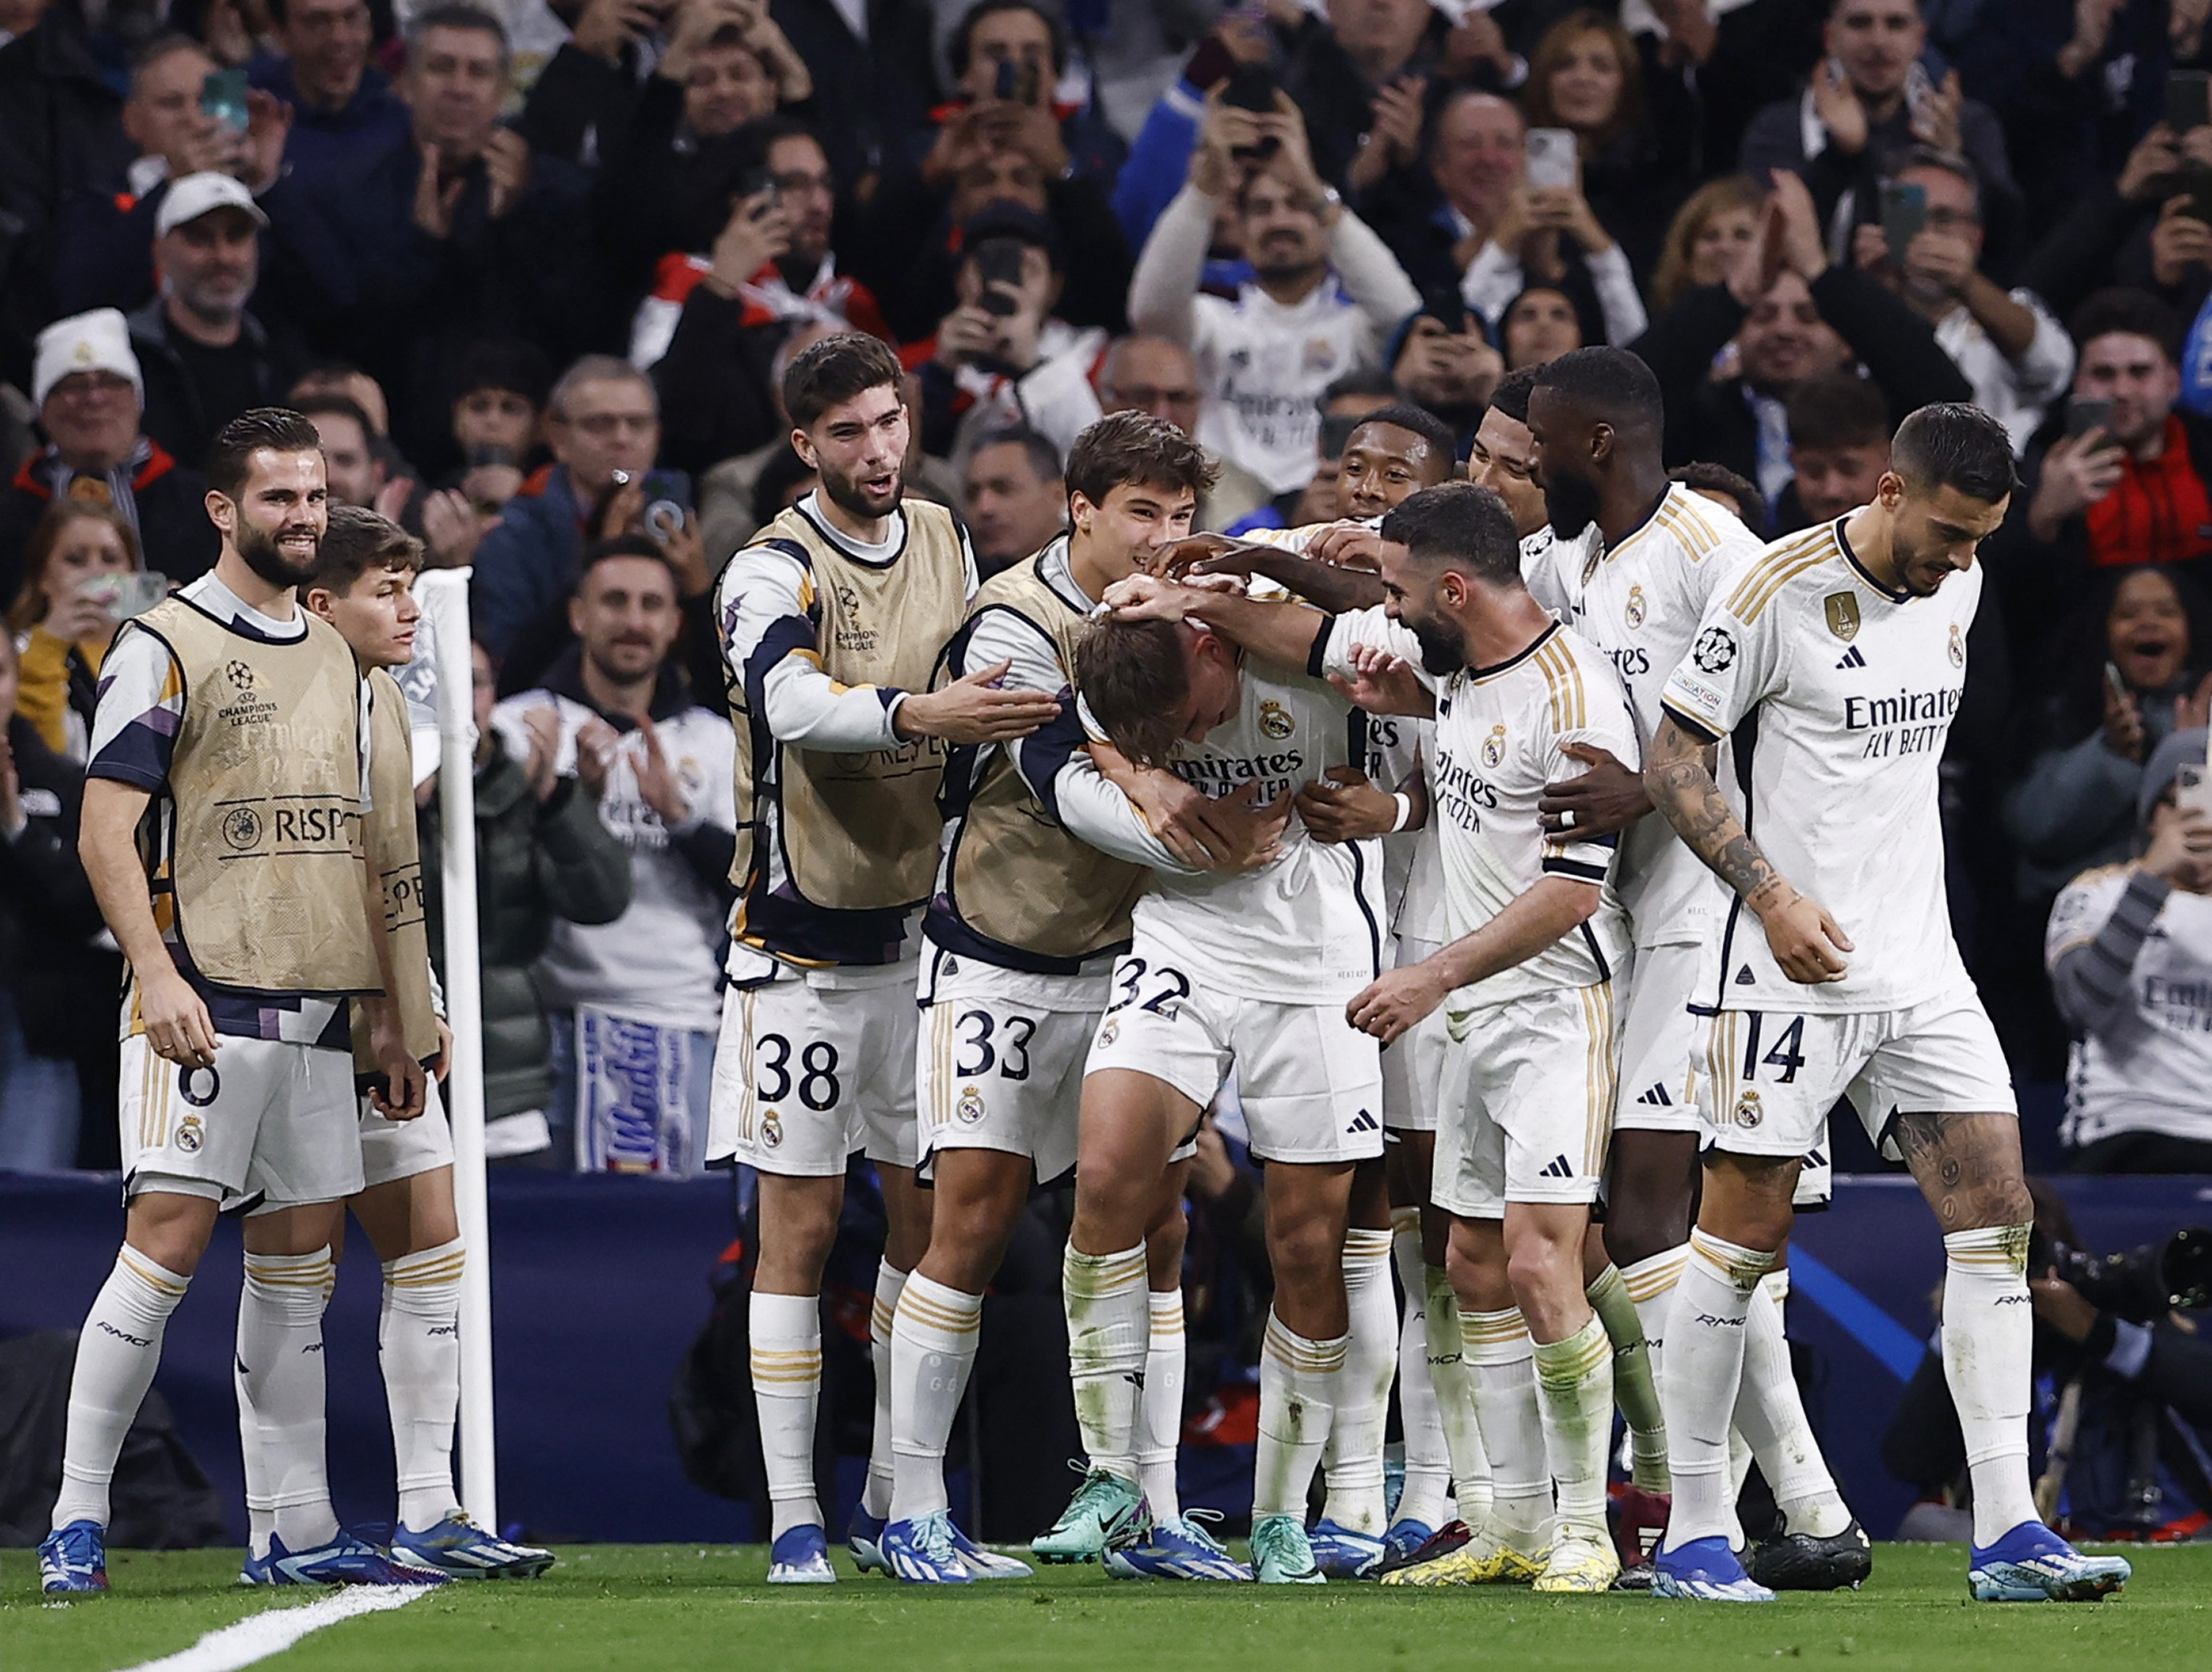 Real Madrid secure top spot after recovering to beat Napoli 4-2